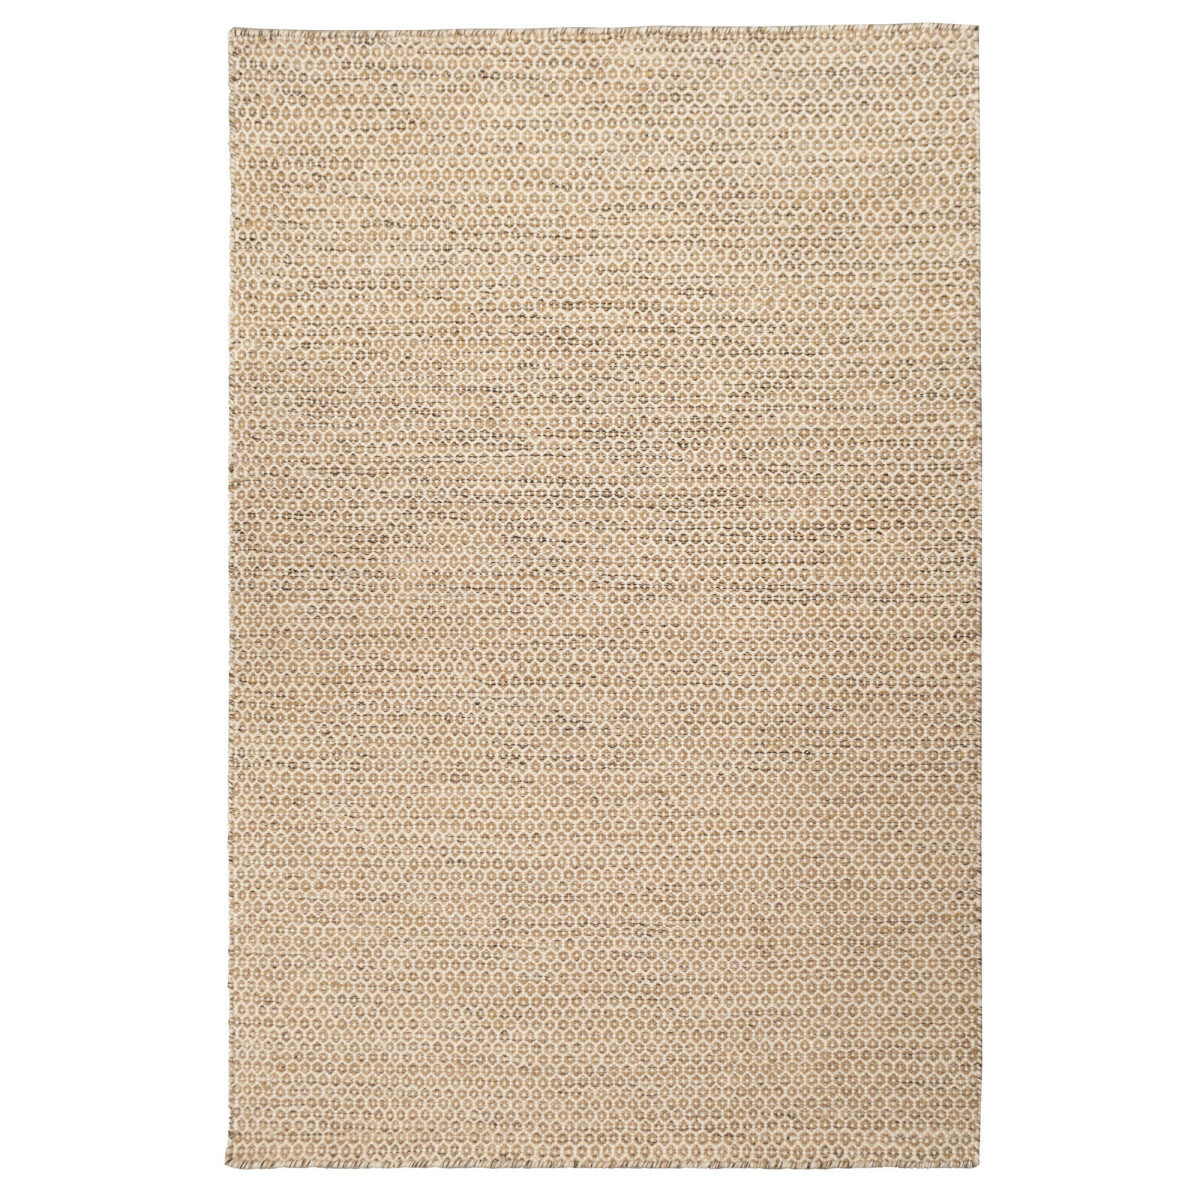 ALFOMBRA - LANA NATURAL-BEIGE OURAY 